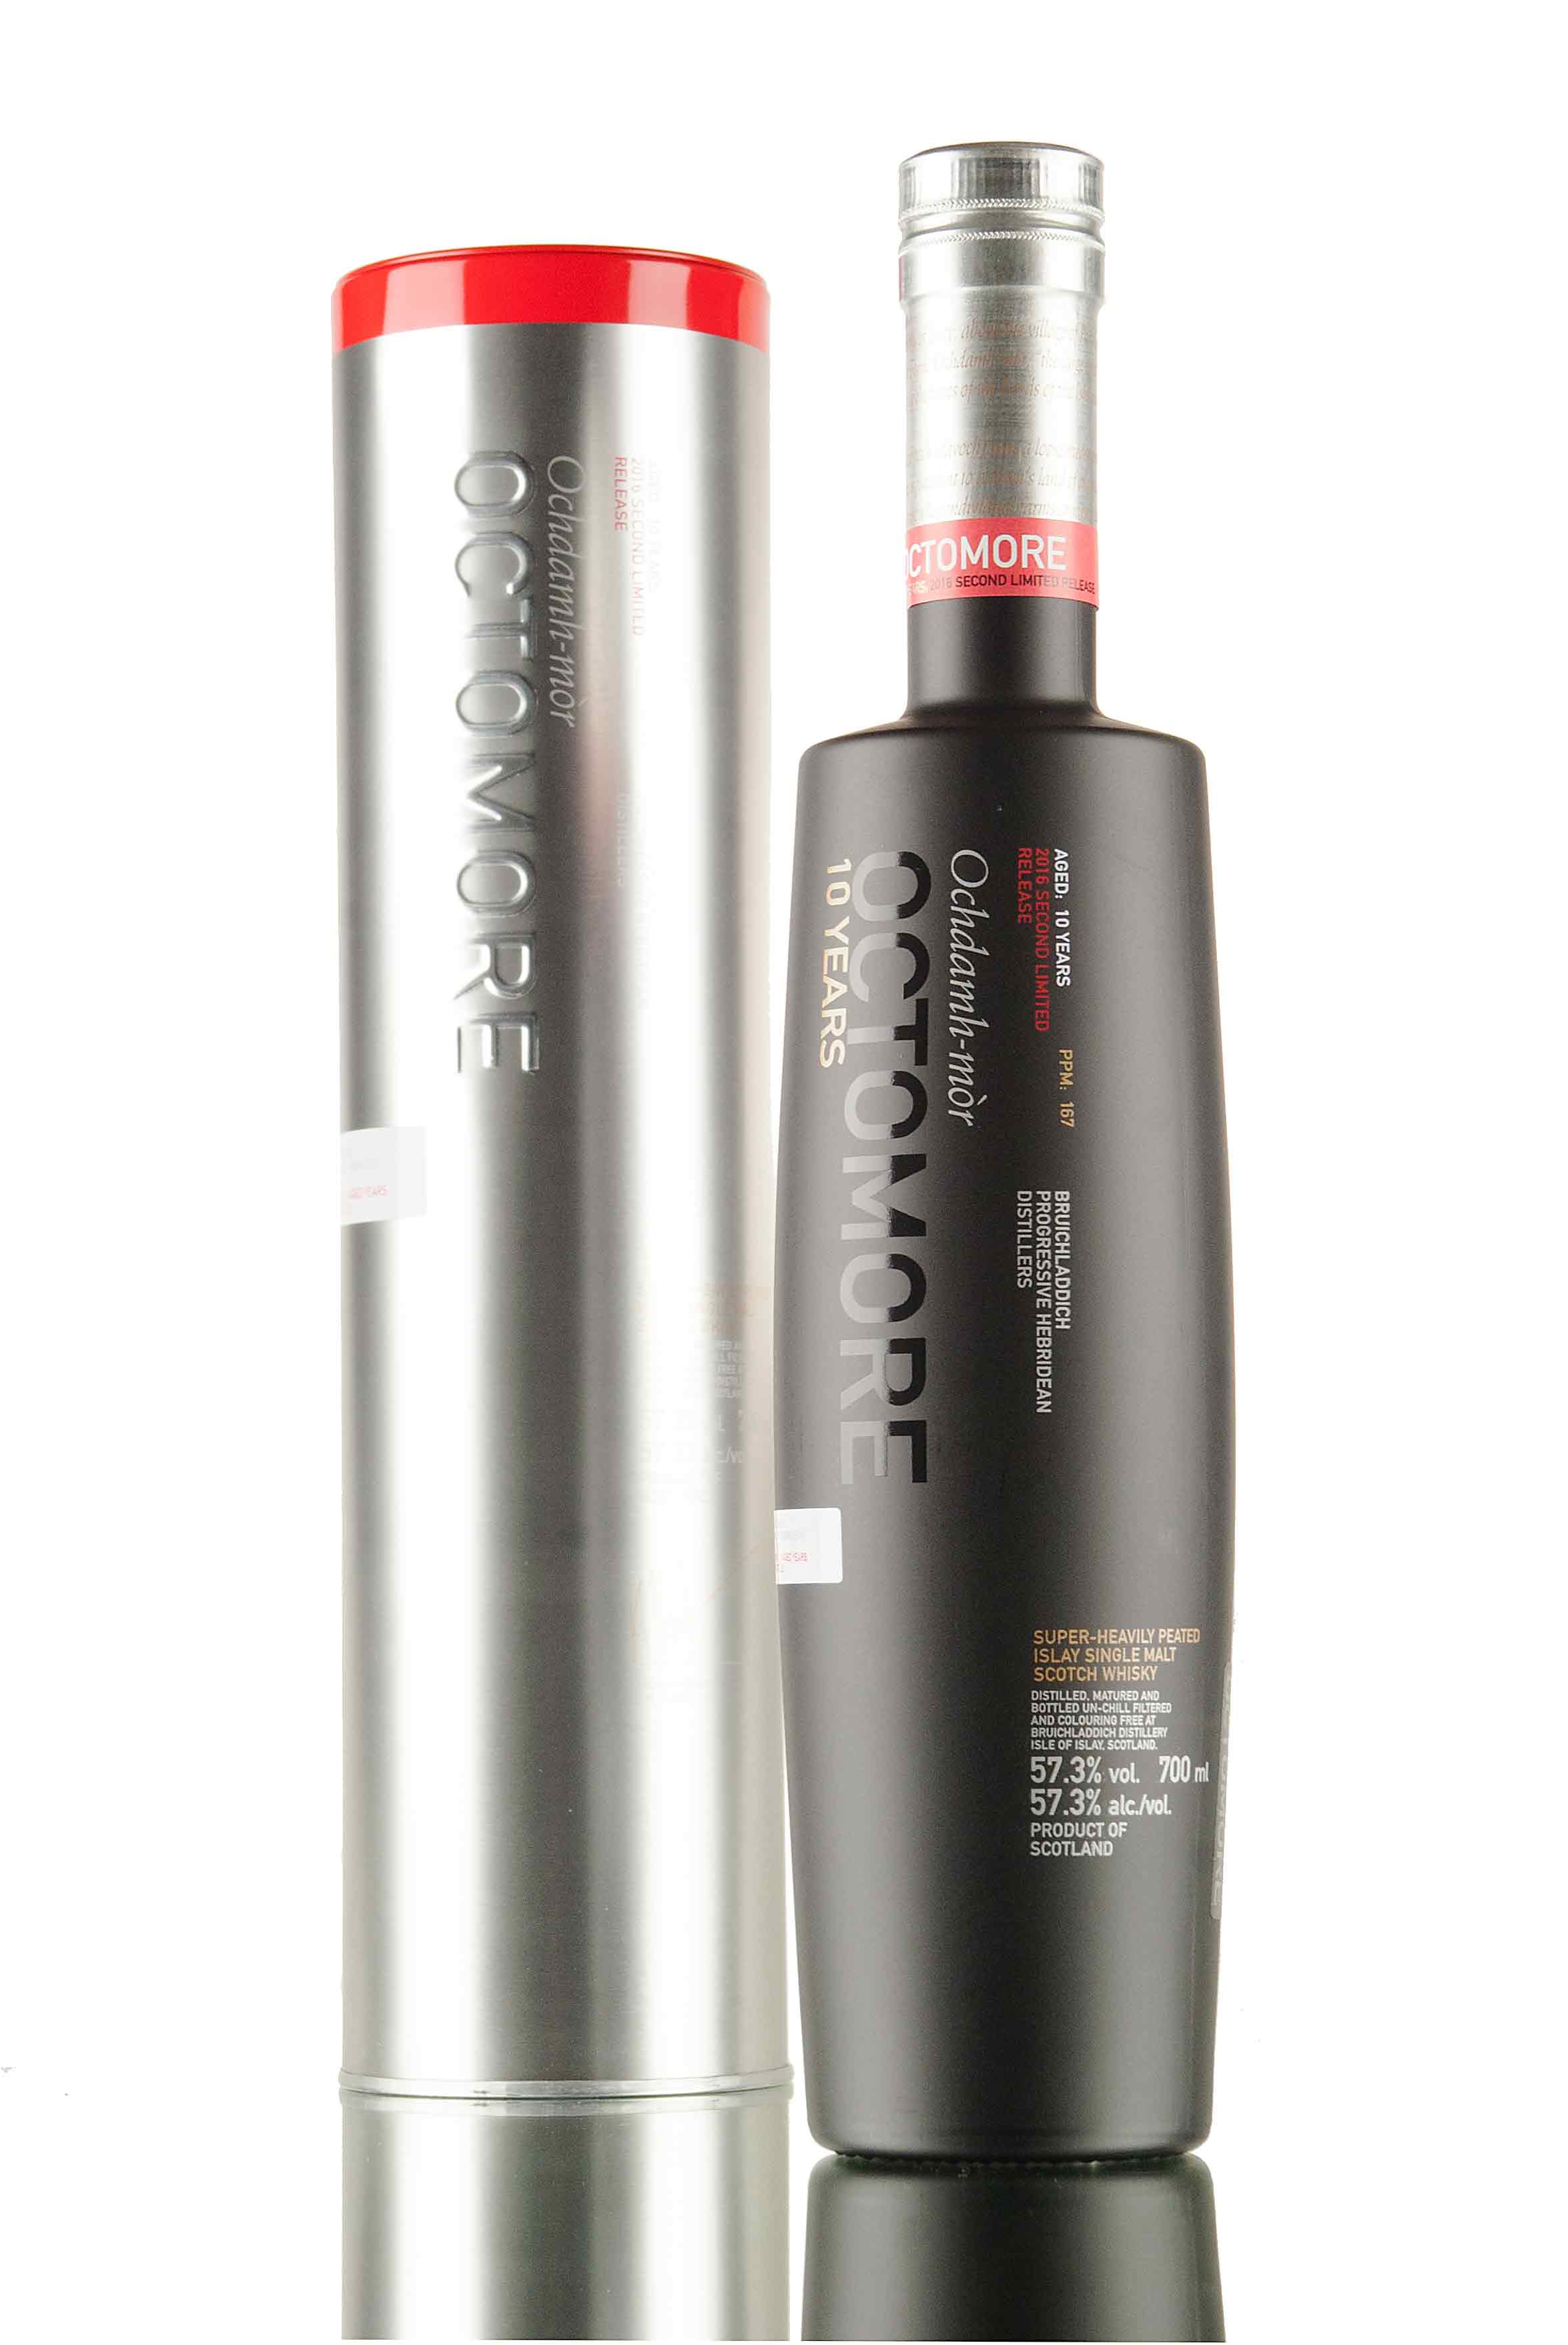 Octomore 10 Year Old - 2nd Limited Edition